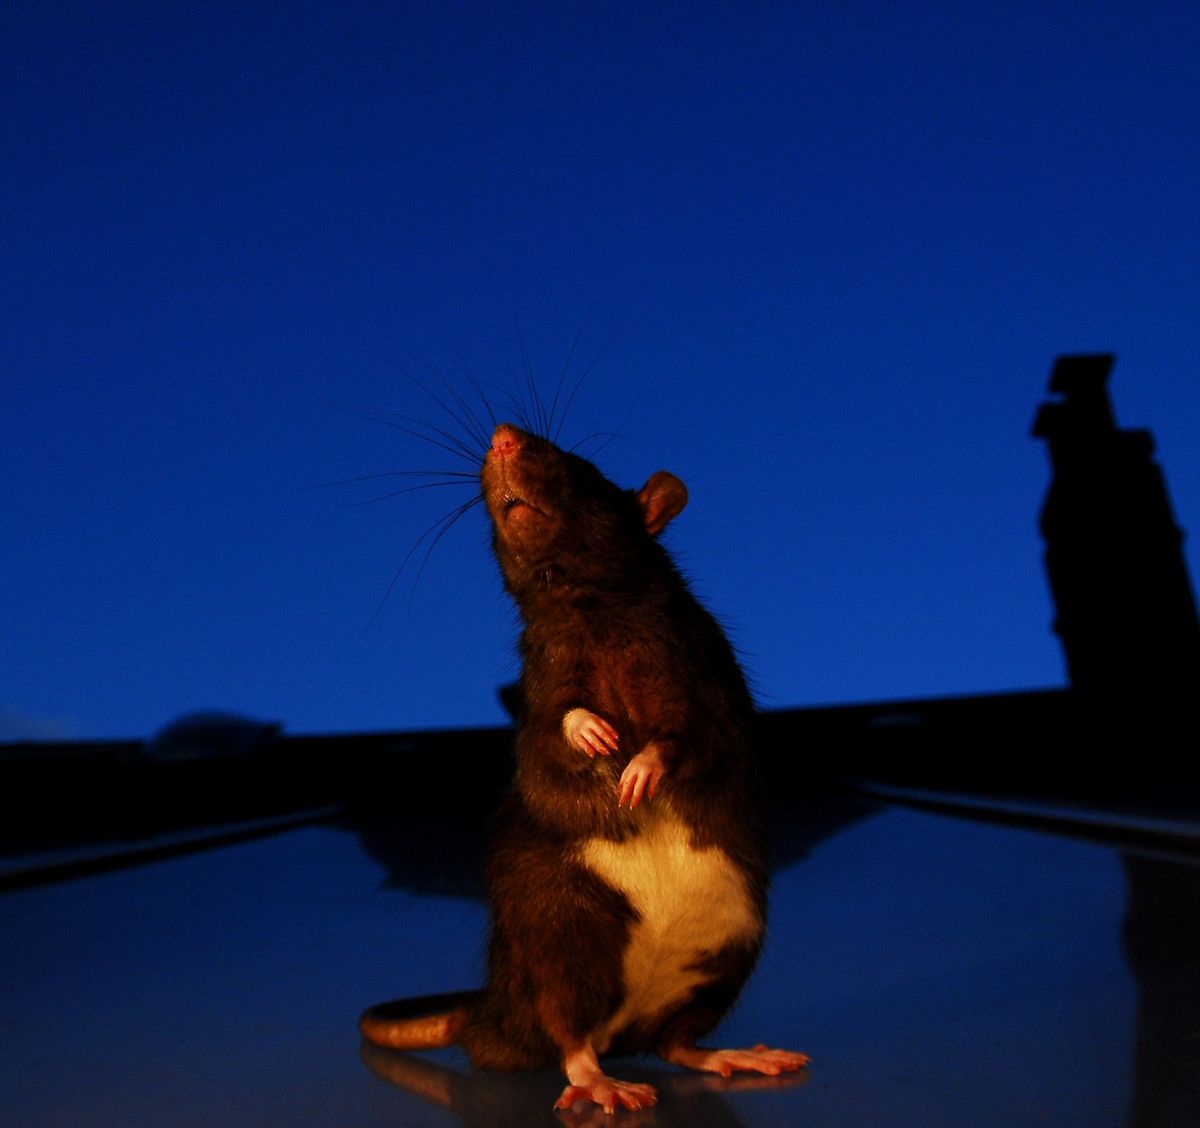 A rat with a white belly standing up against a dark blue sky